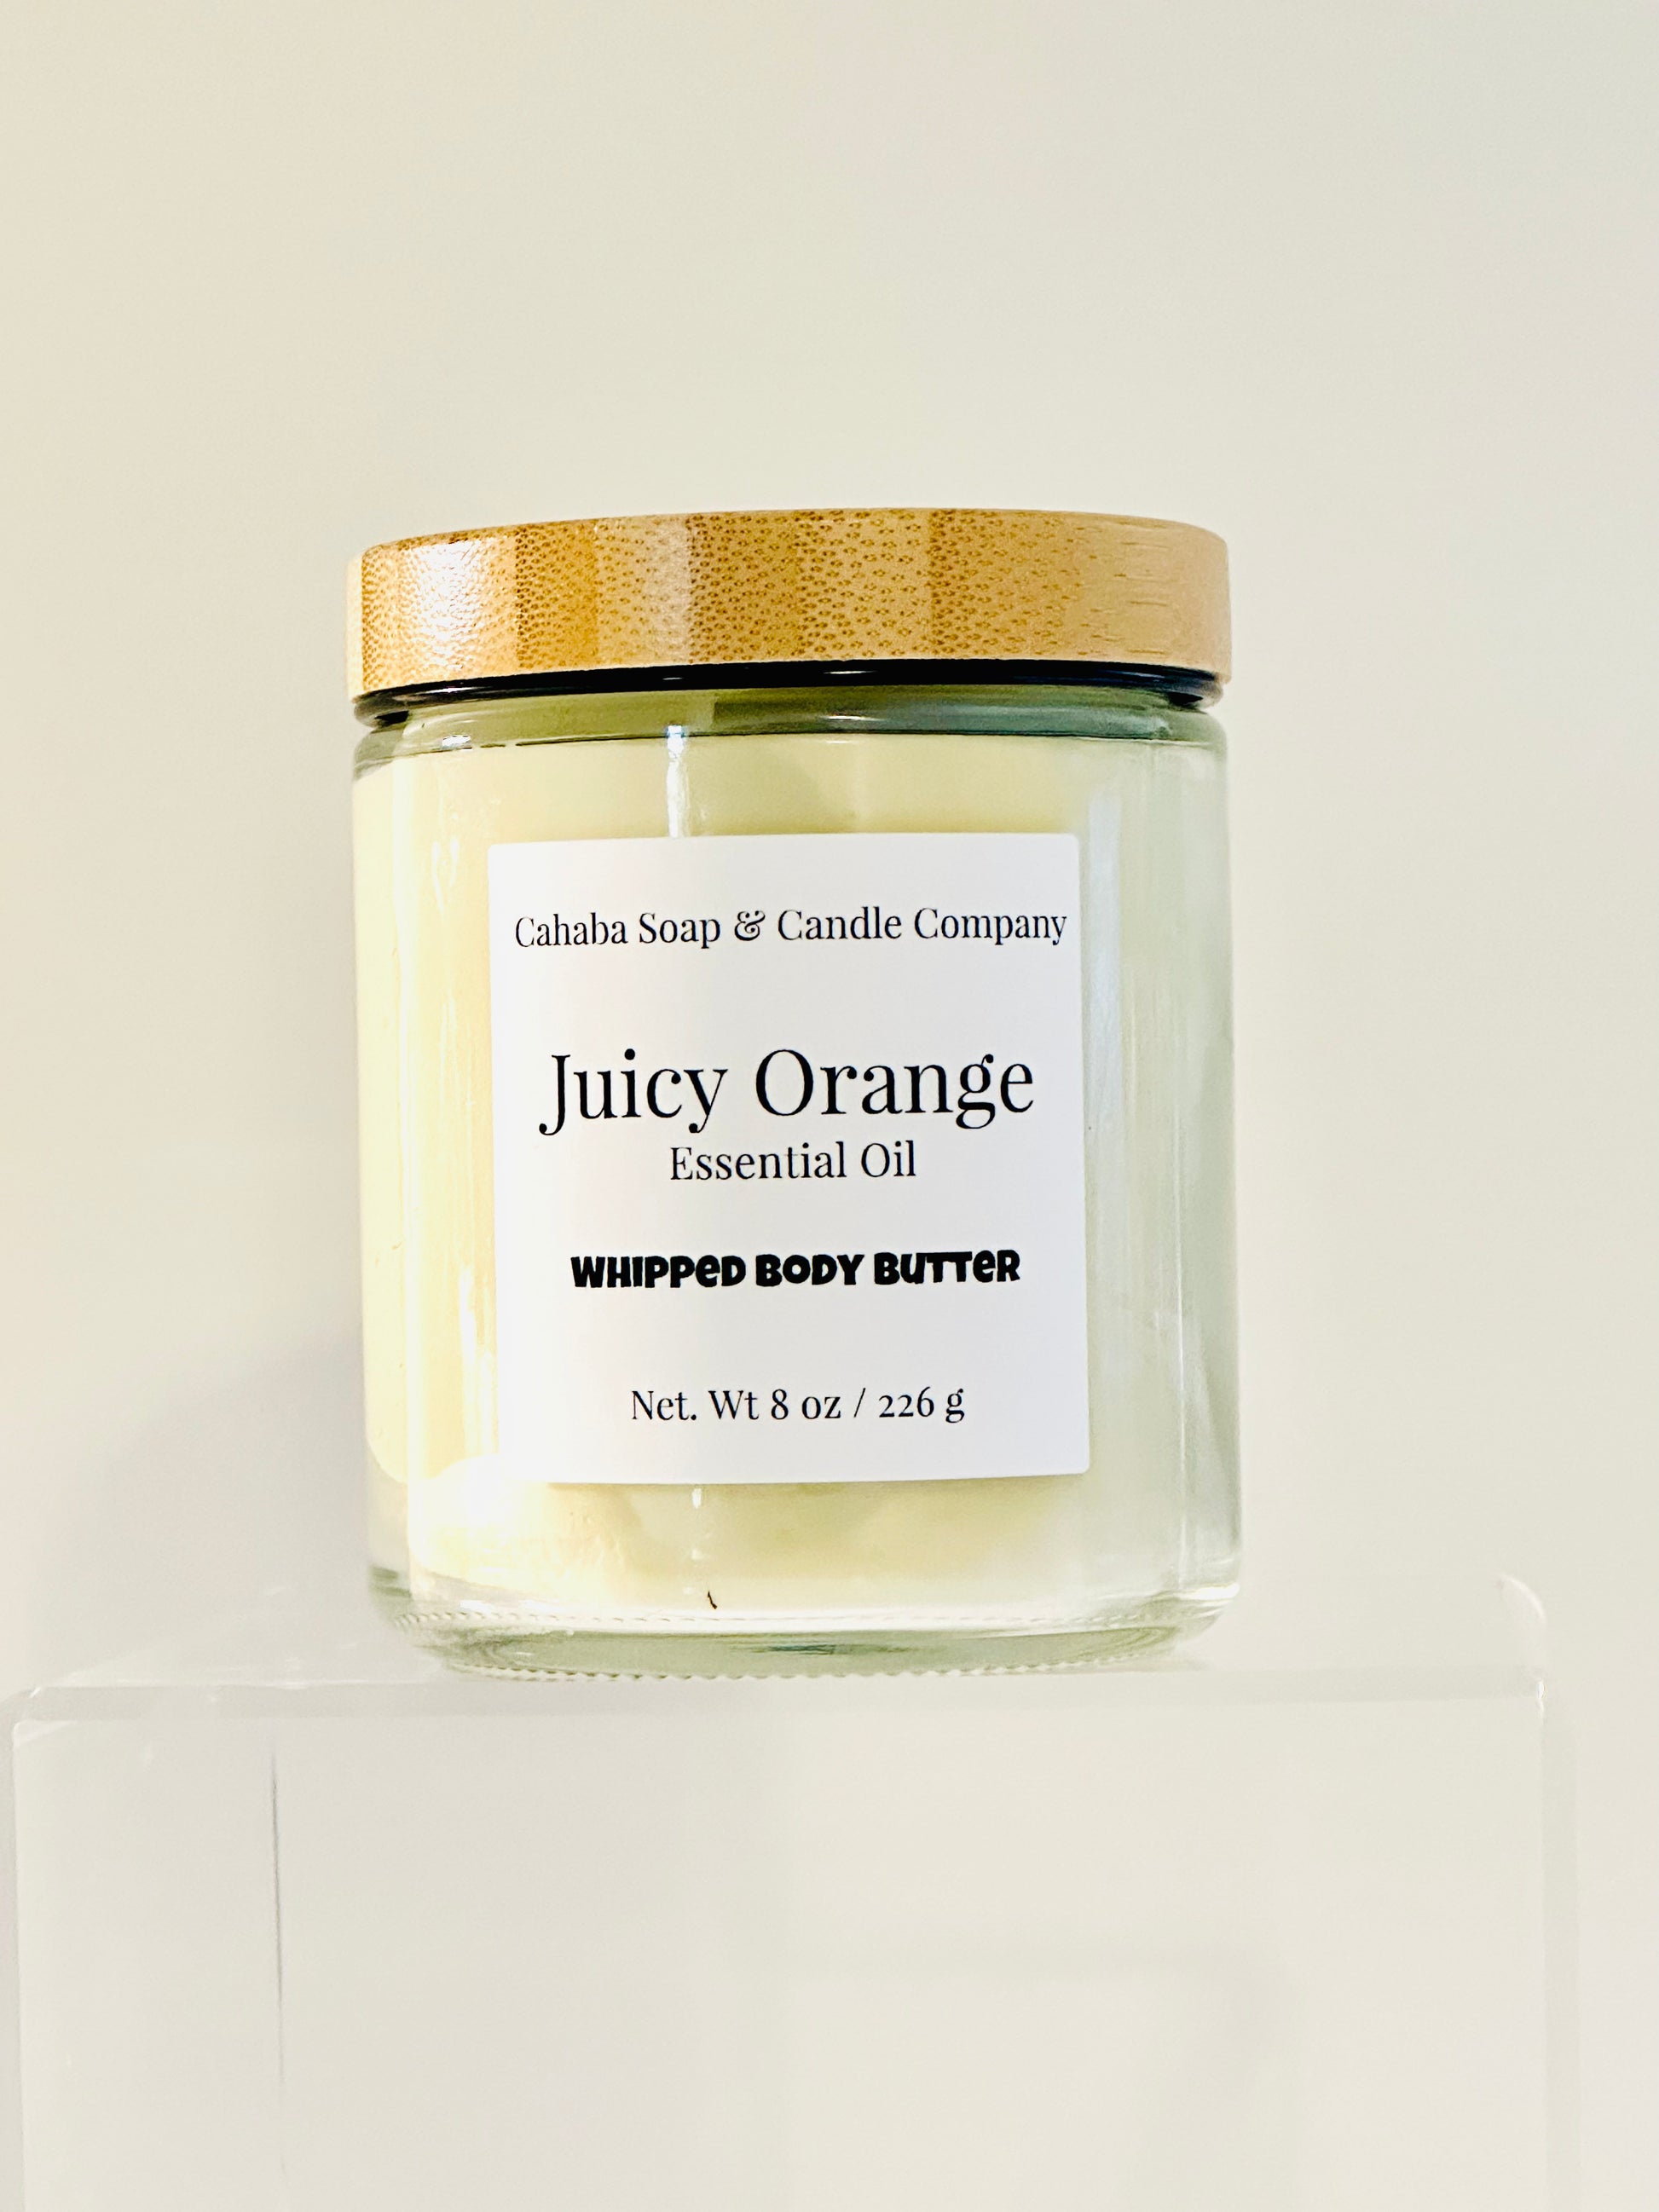 Juicy Orange - Essential Oil Body Butter - Cahaba Soap and Candle Company